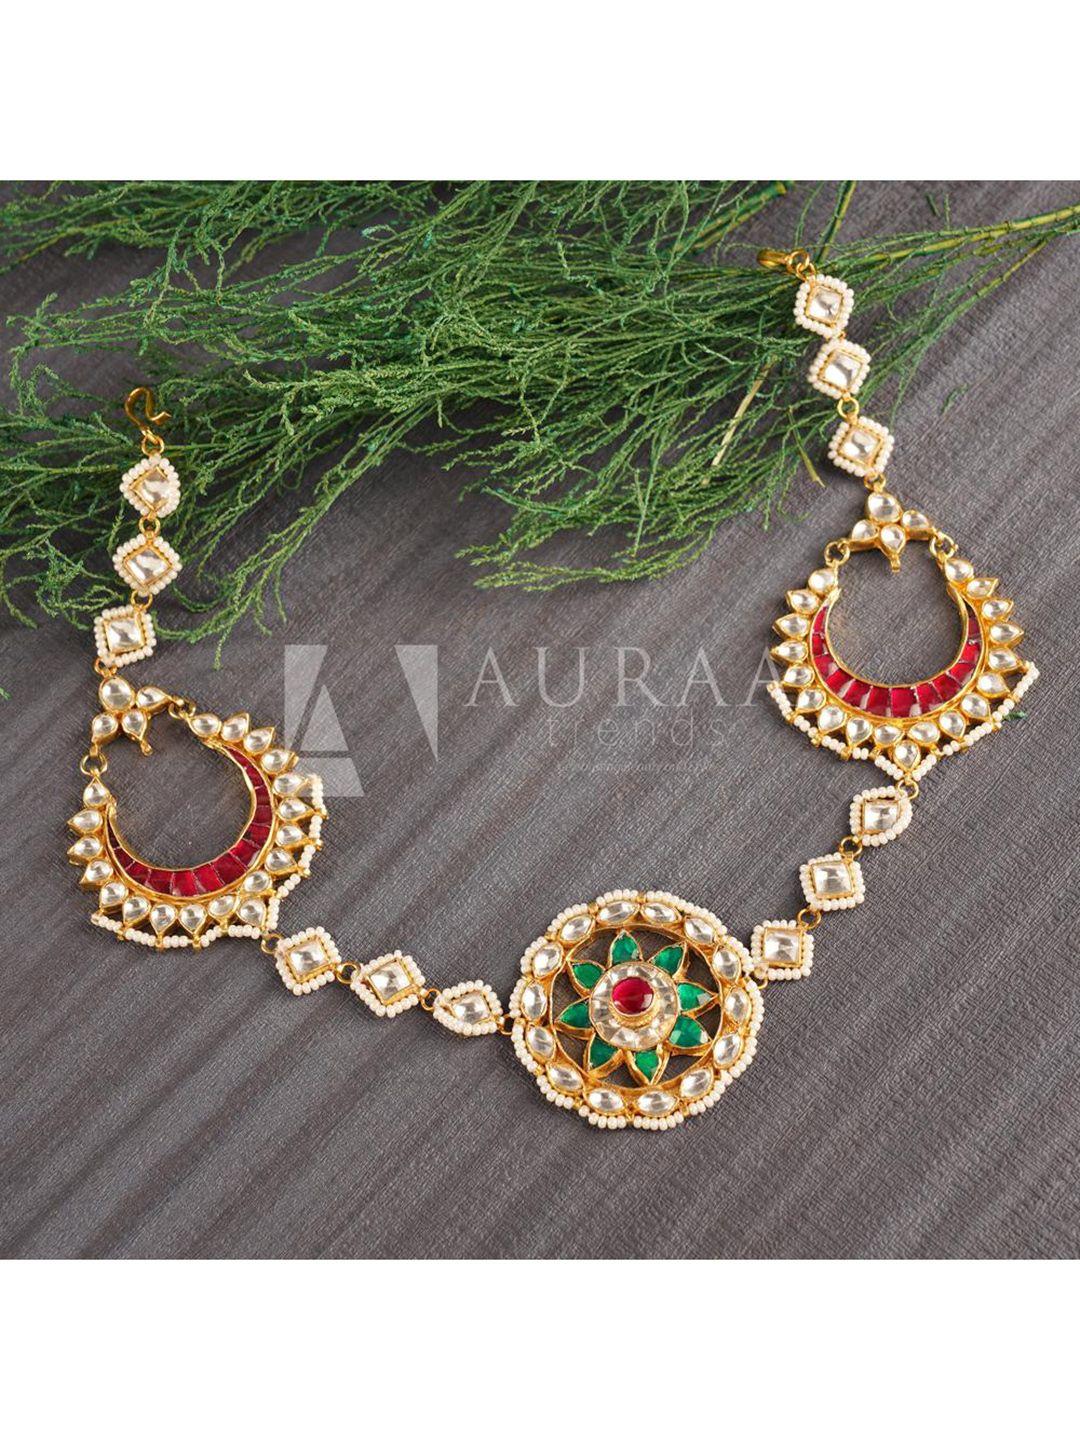 auraa trends 22 kt gold-plated white & green kundan-studded & pearl beaded head chain